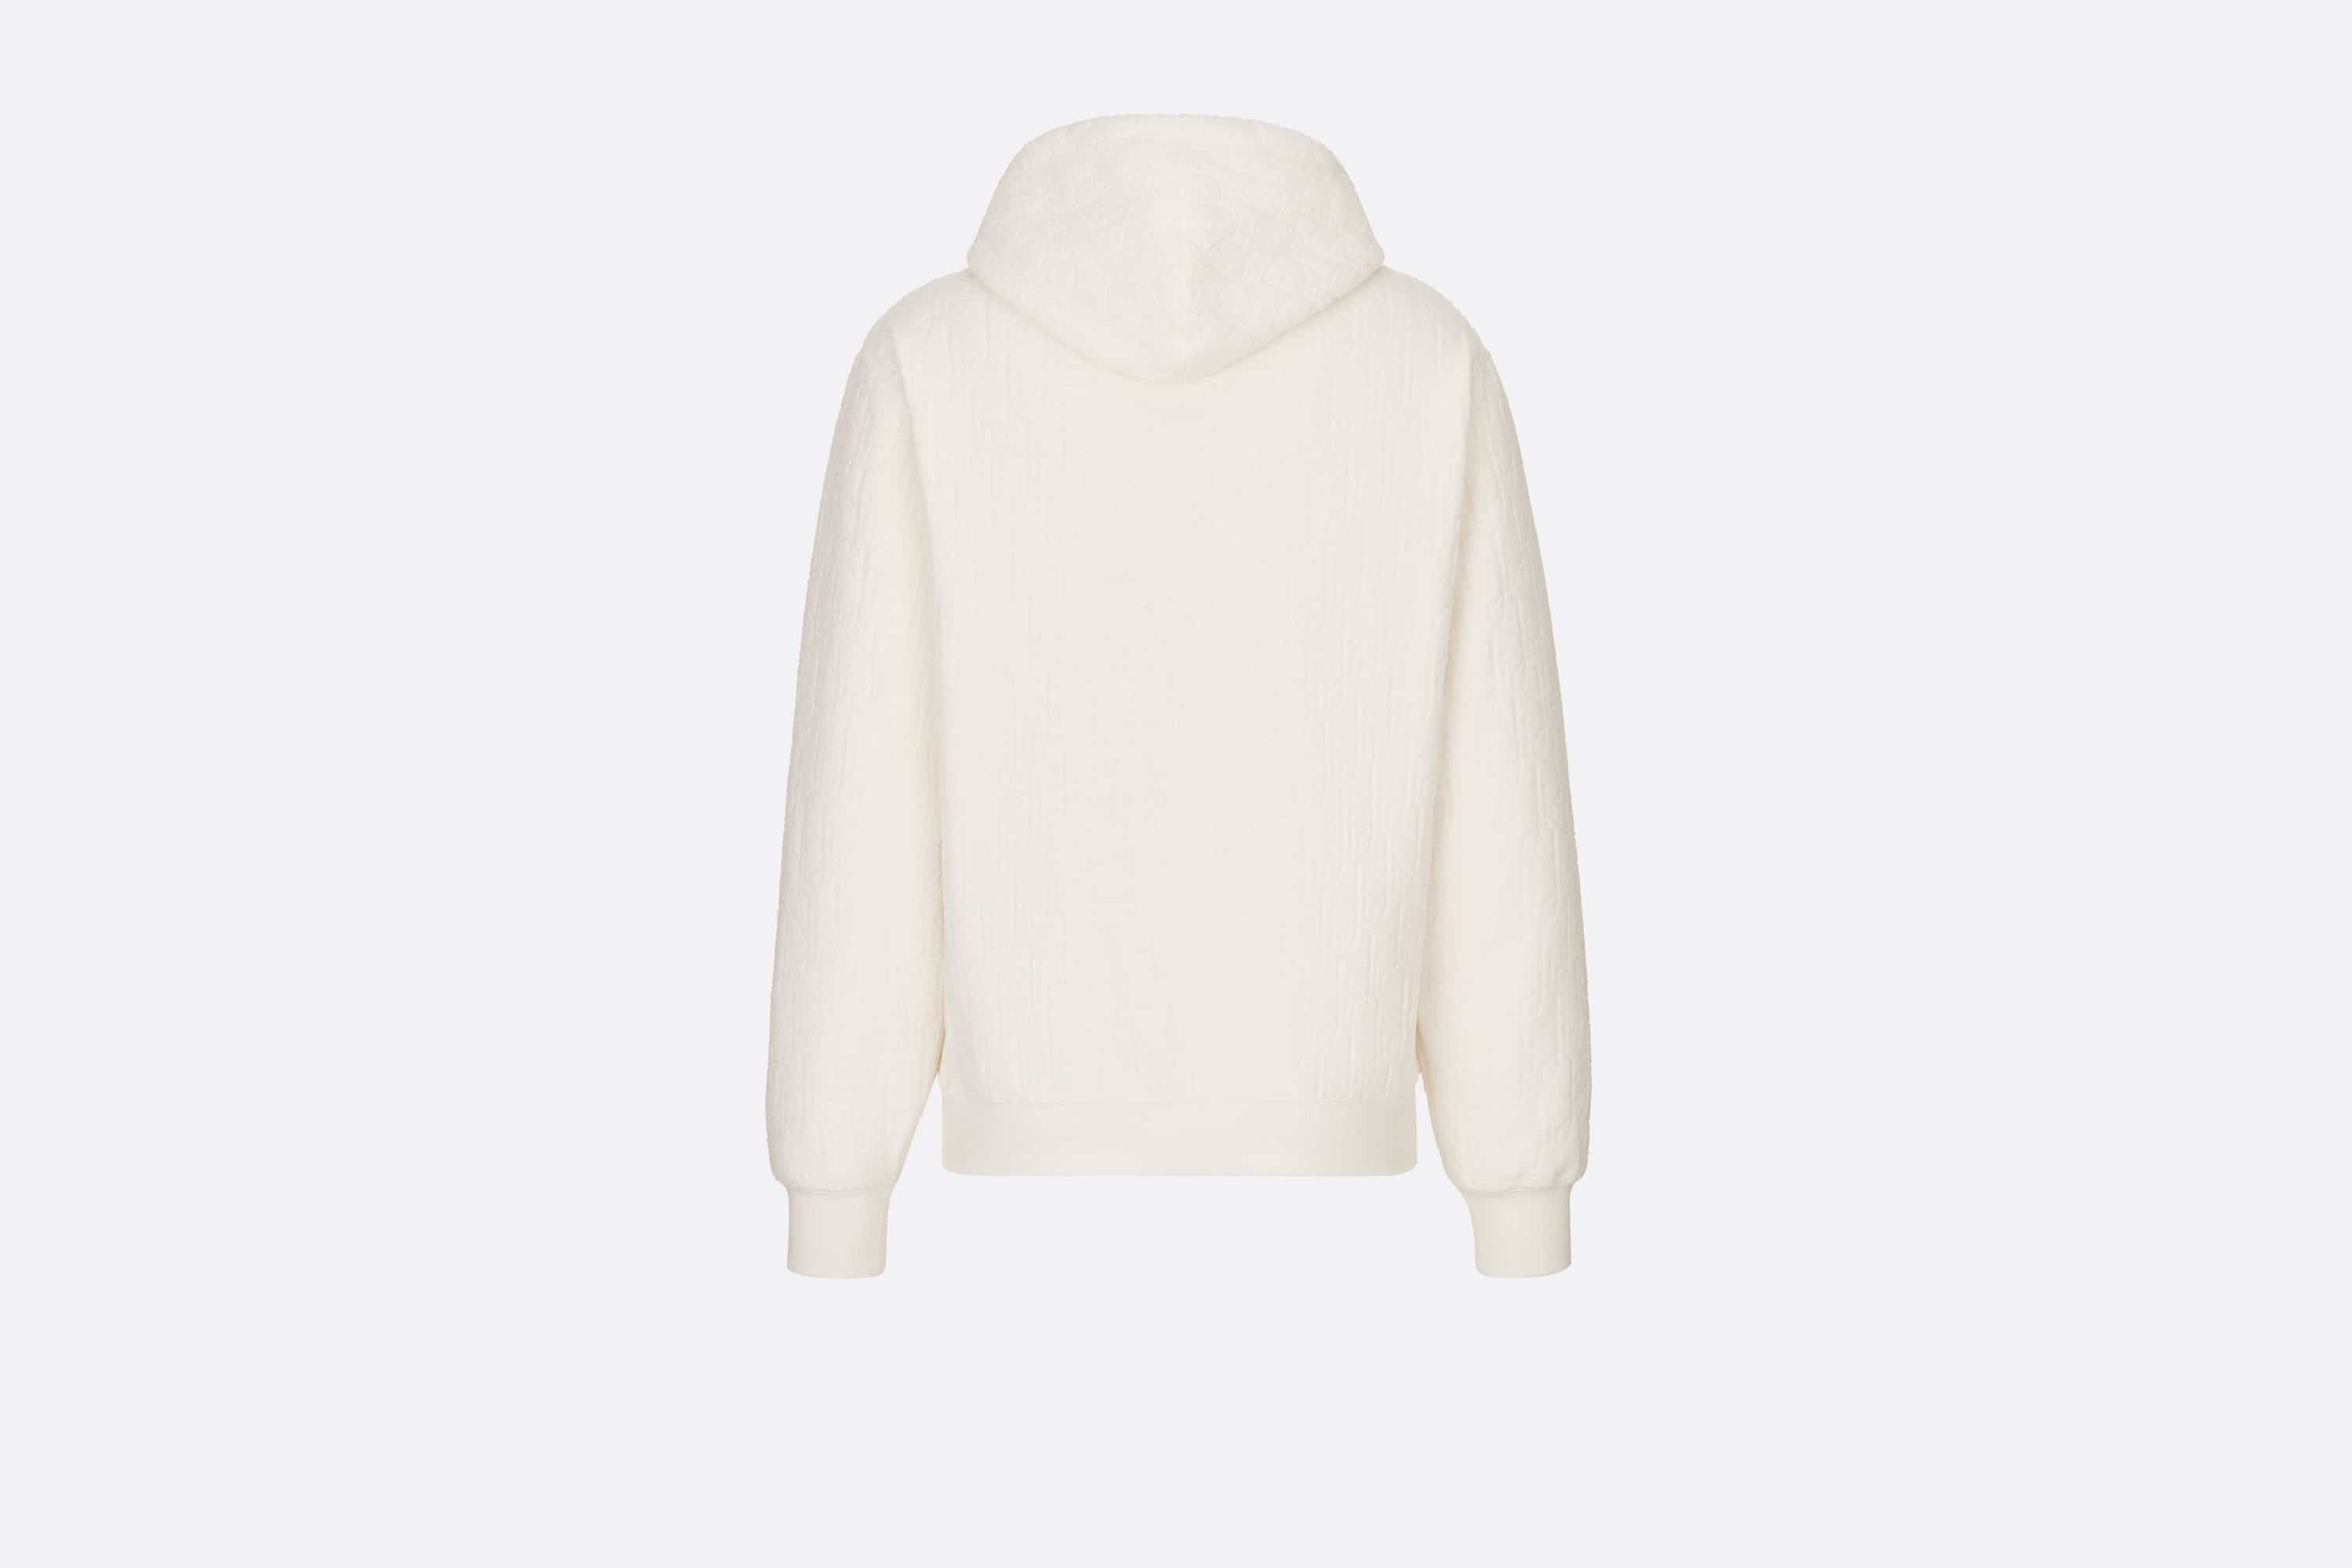 Dior Oblique Hooded Sweatshirt, Relaxed Fit - 2